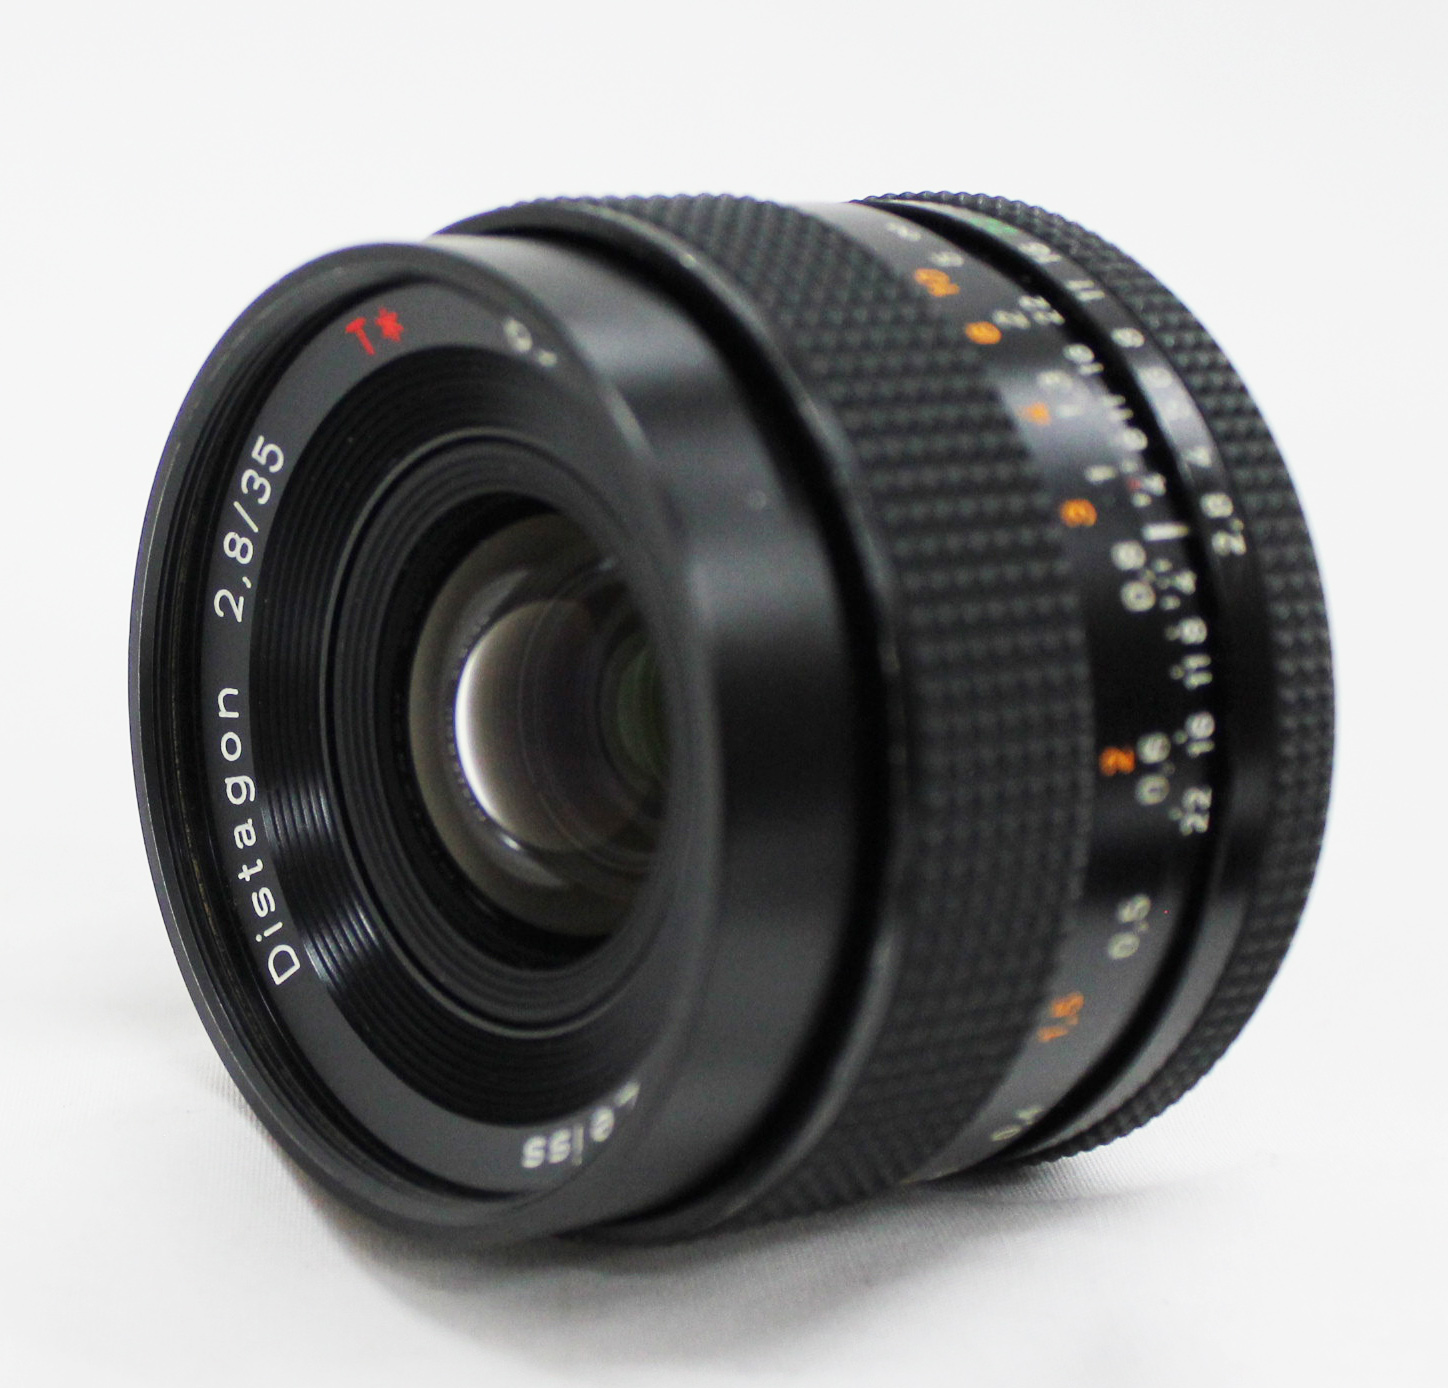  Contax Carl Zeiss Distagon T* 35mm F2.8 MMJ MF Lens from Japan Photo 1